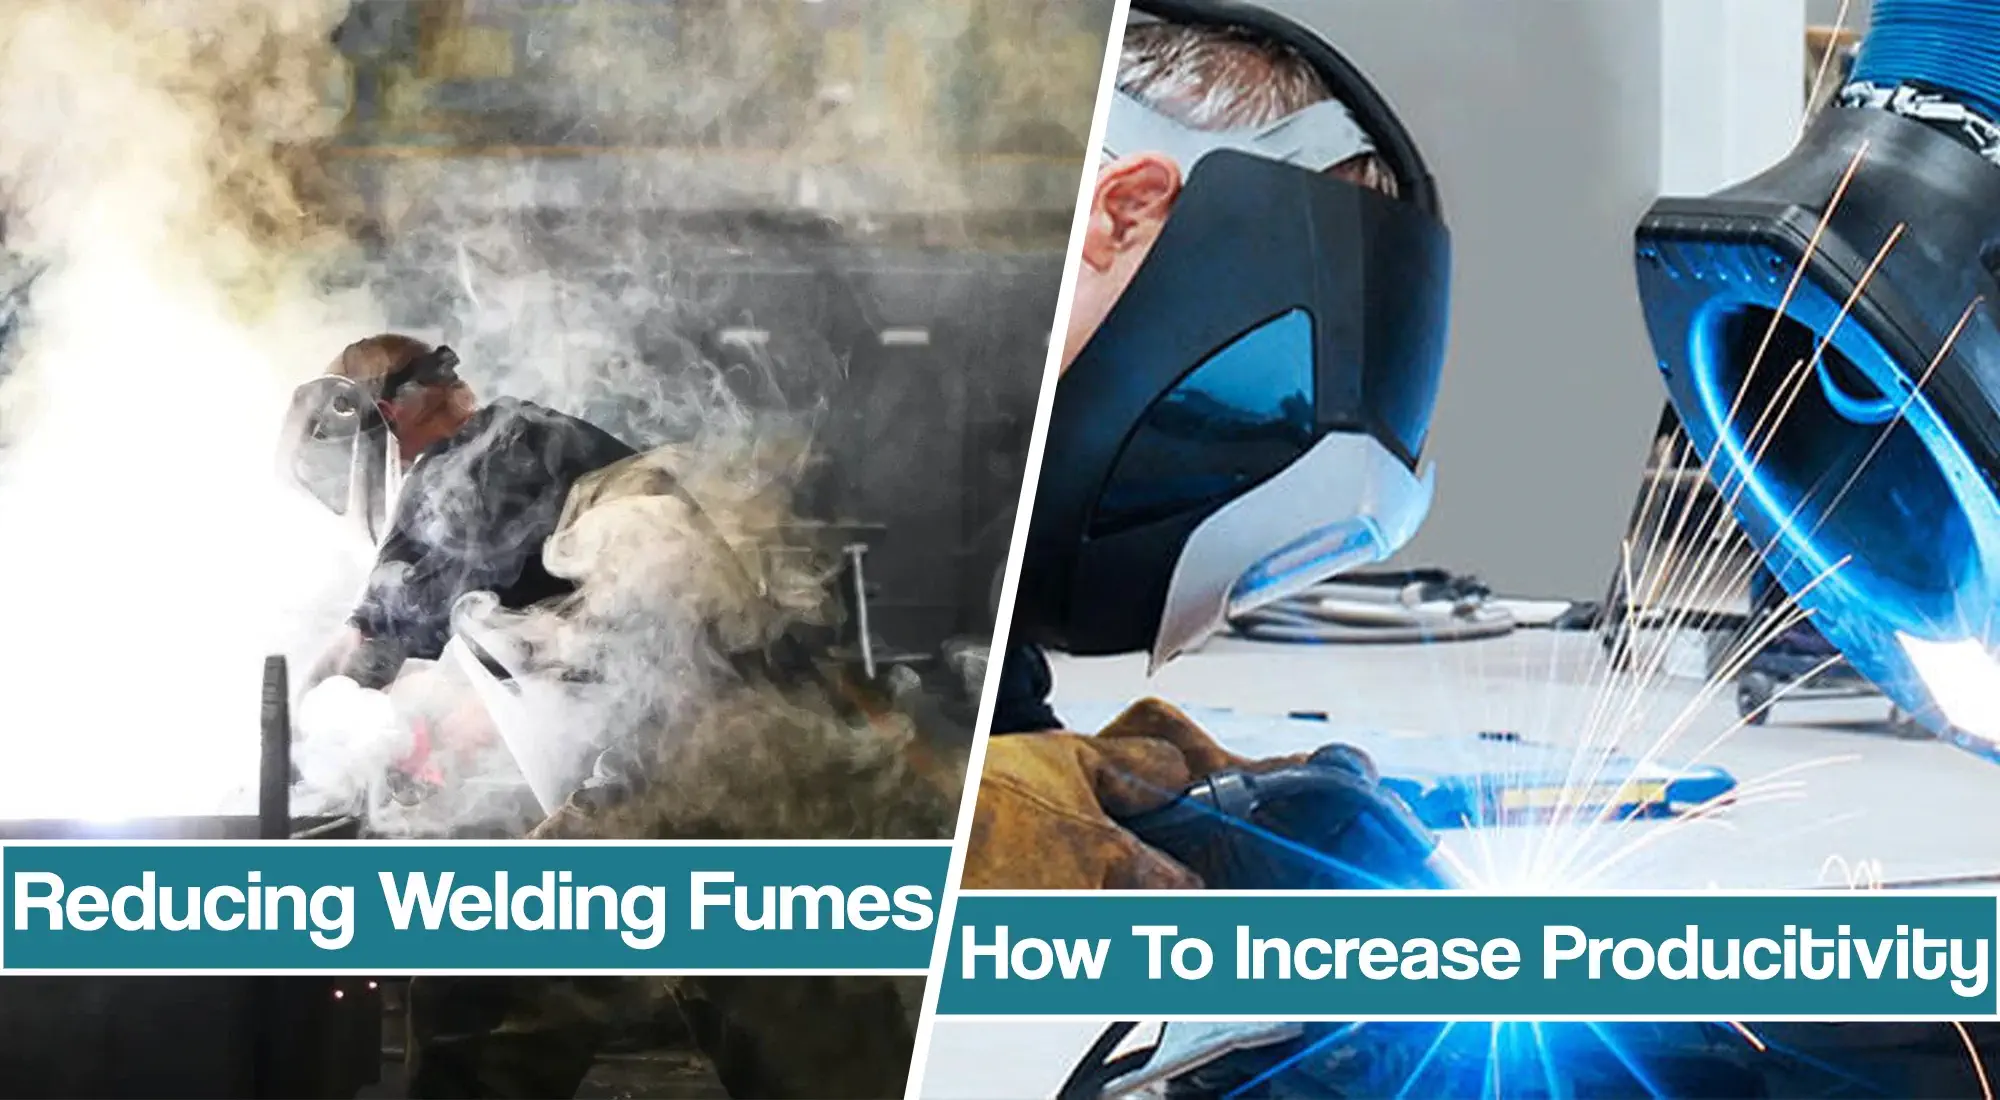 Reducing Welding Fumes To Increase Productivity – How Fume Exposure Can Impact Efficiency